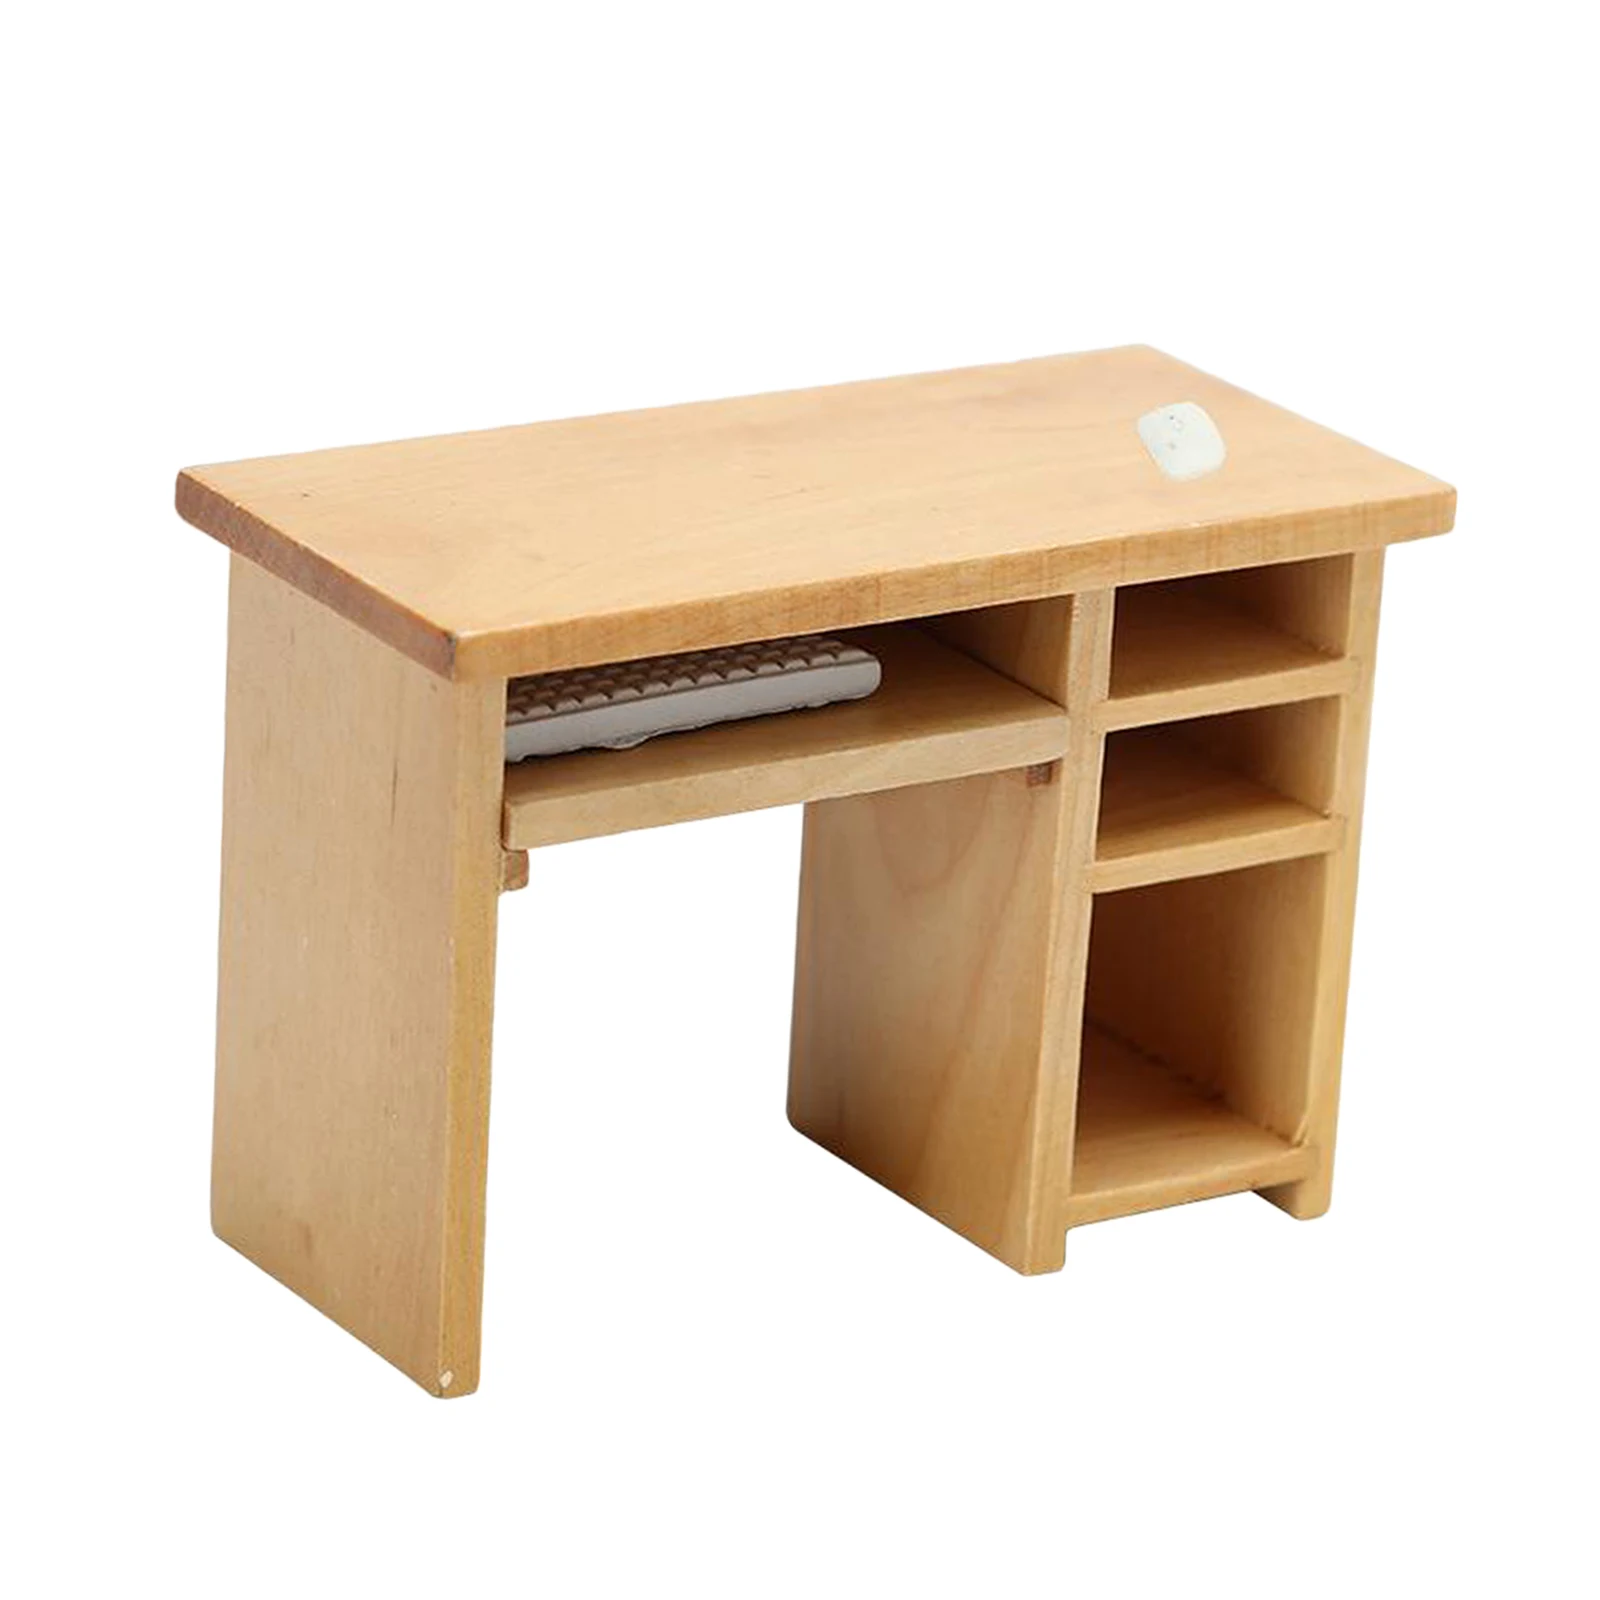 Cute Miniature Wooden Computer Desk with Mouse and Keyboard, 1:12 Scale